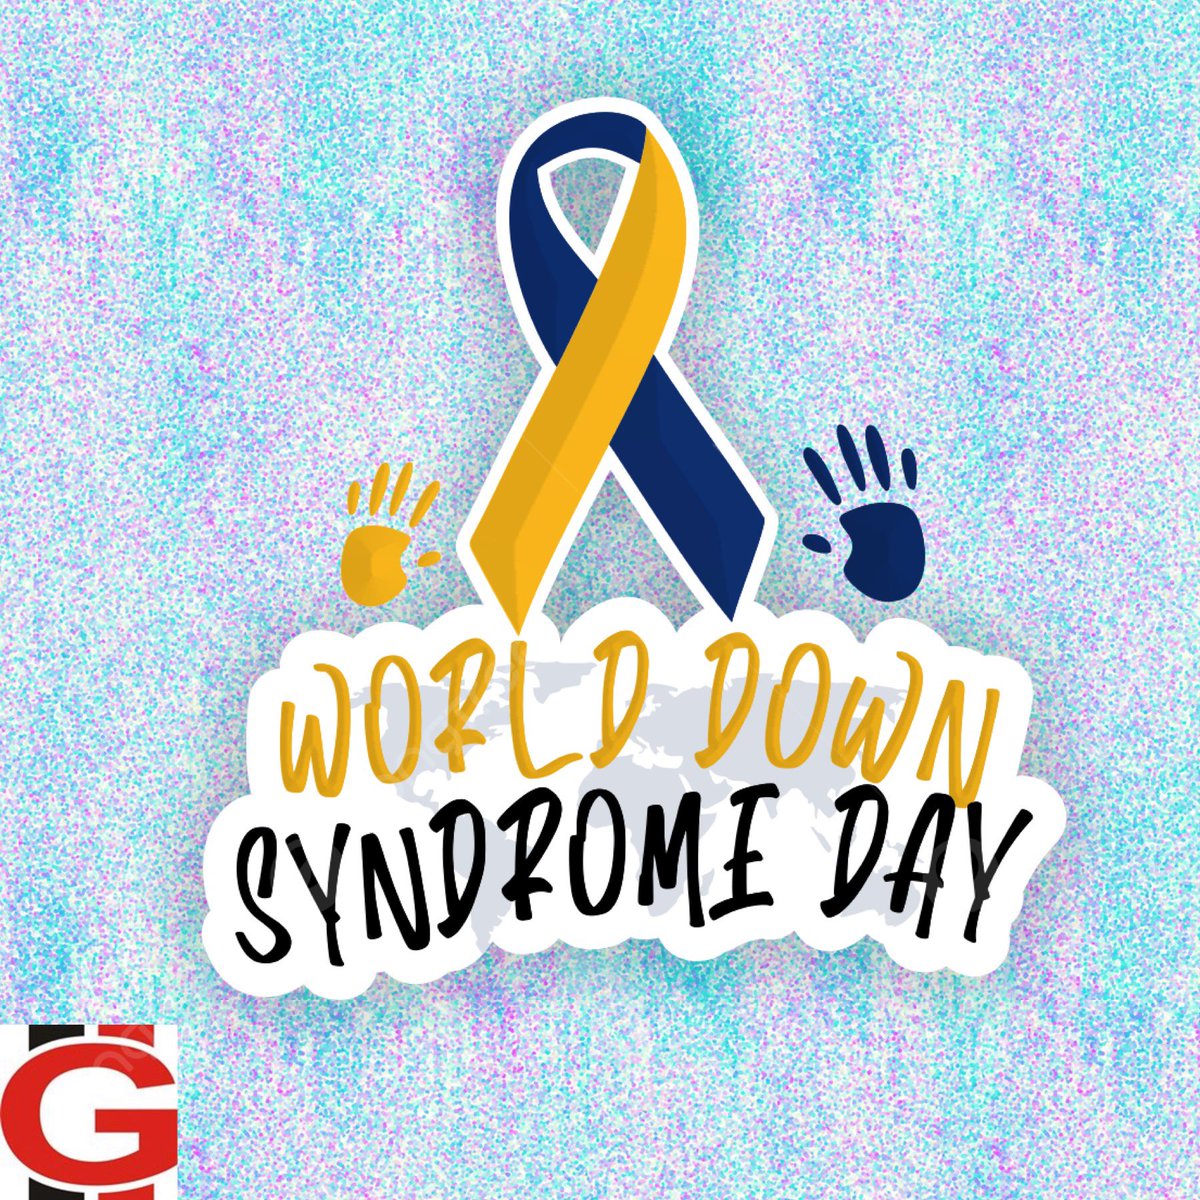 Today is World Down Syndrome Day! Let’s spread love, acceptance, and awareness for those with Down Syndrome. 
💙💛
#WorldDownSyndromeDay #georgiaautogroup